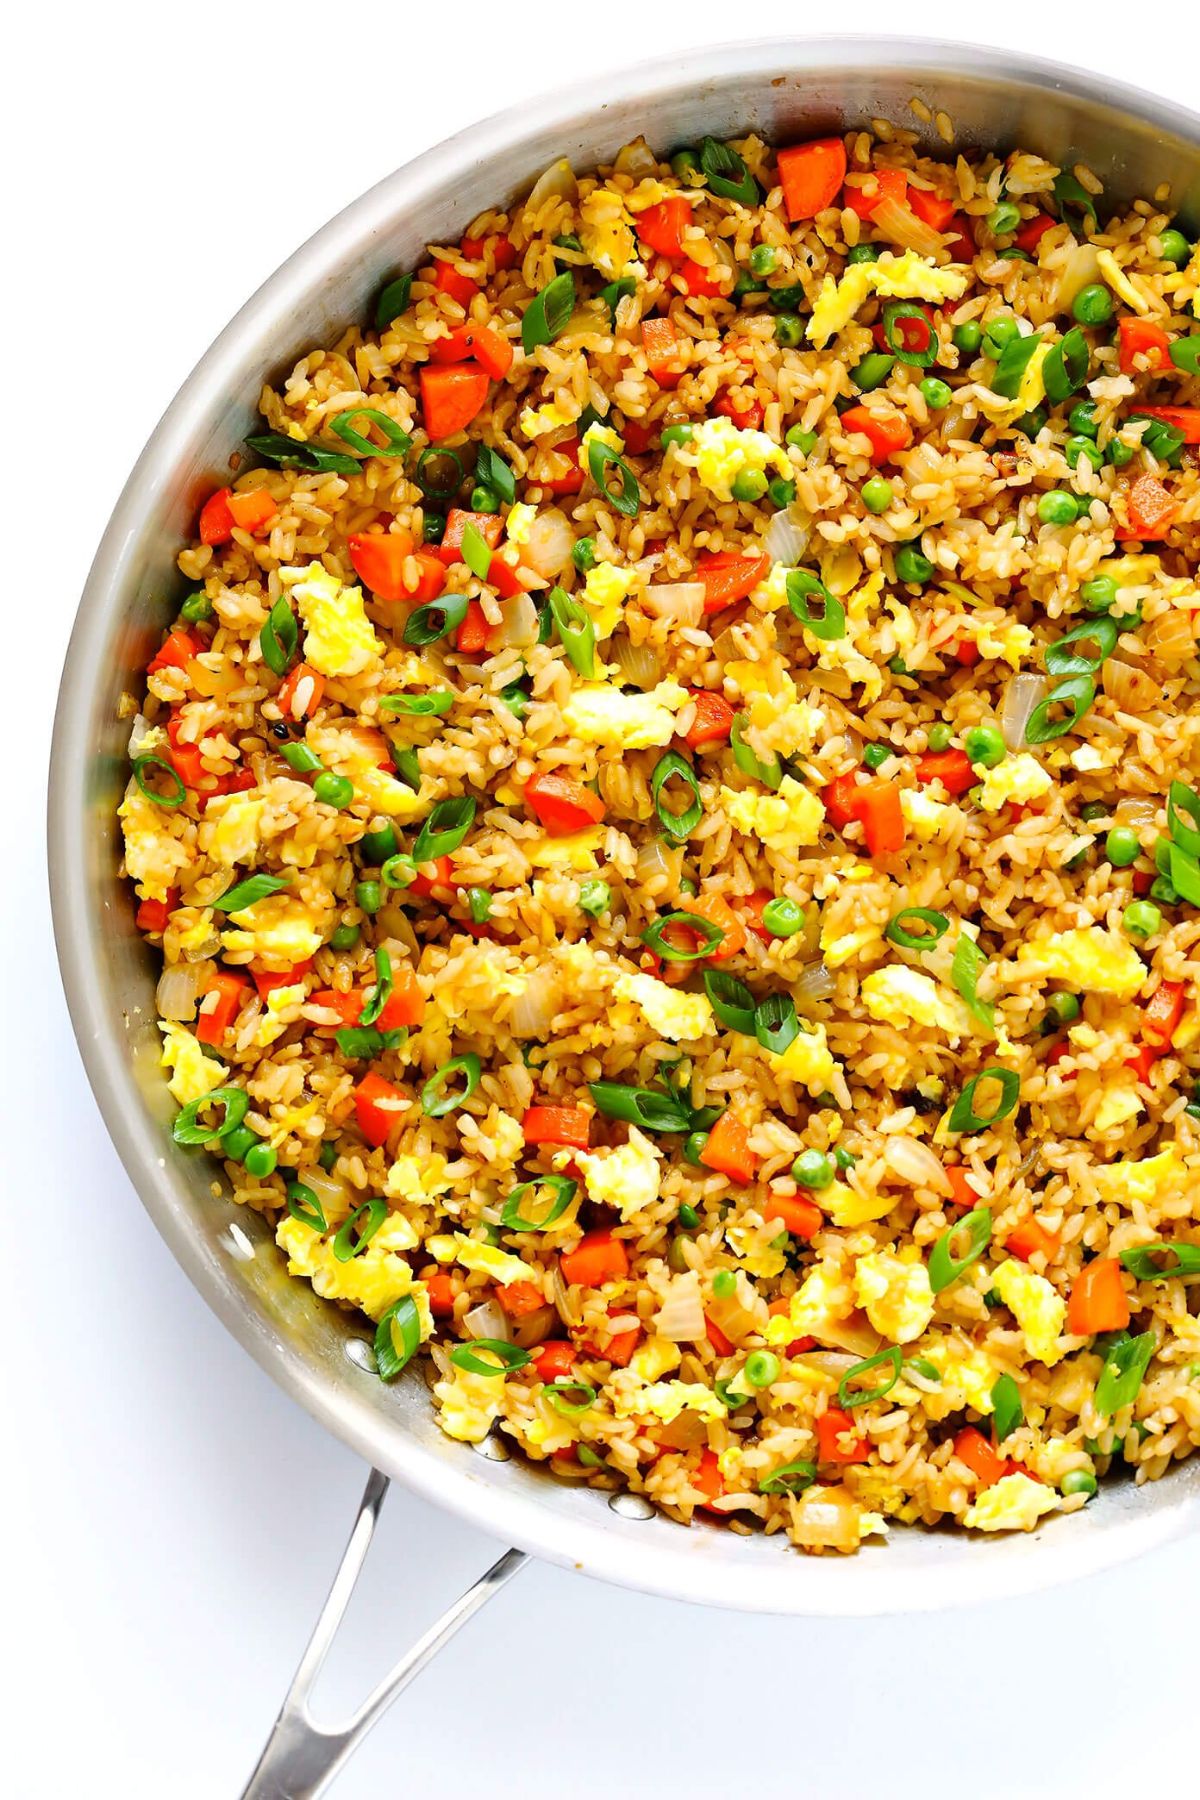 Fried Rice with vegetables in a pan.